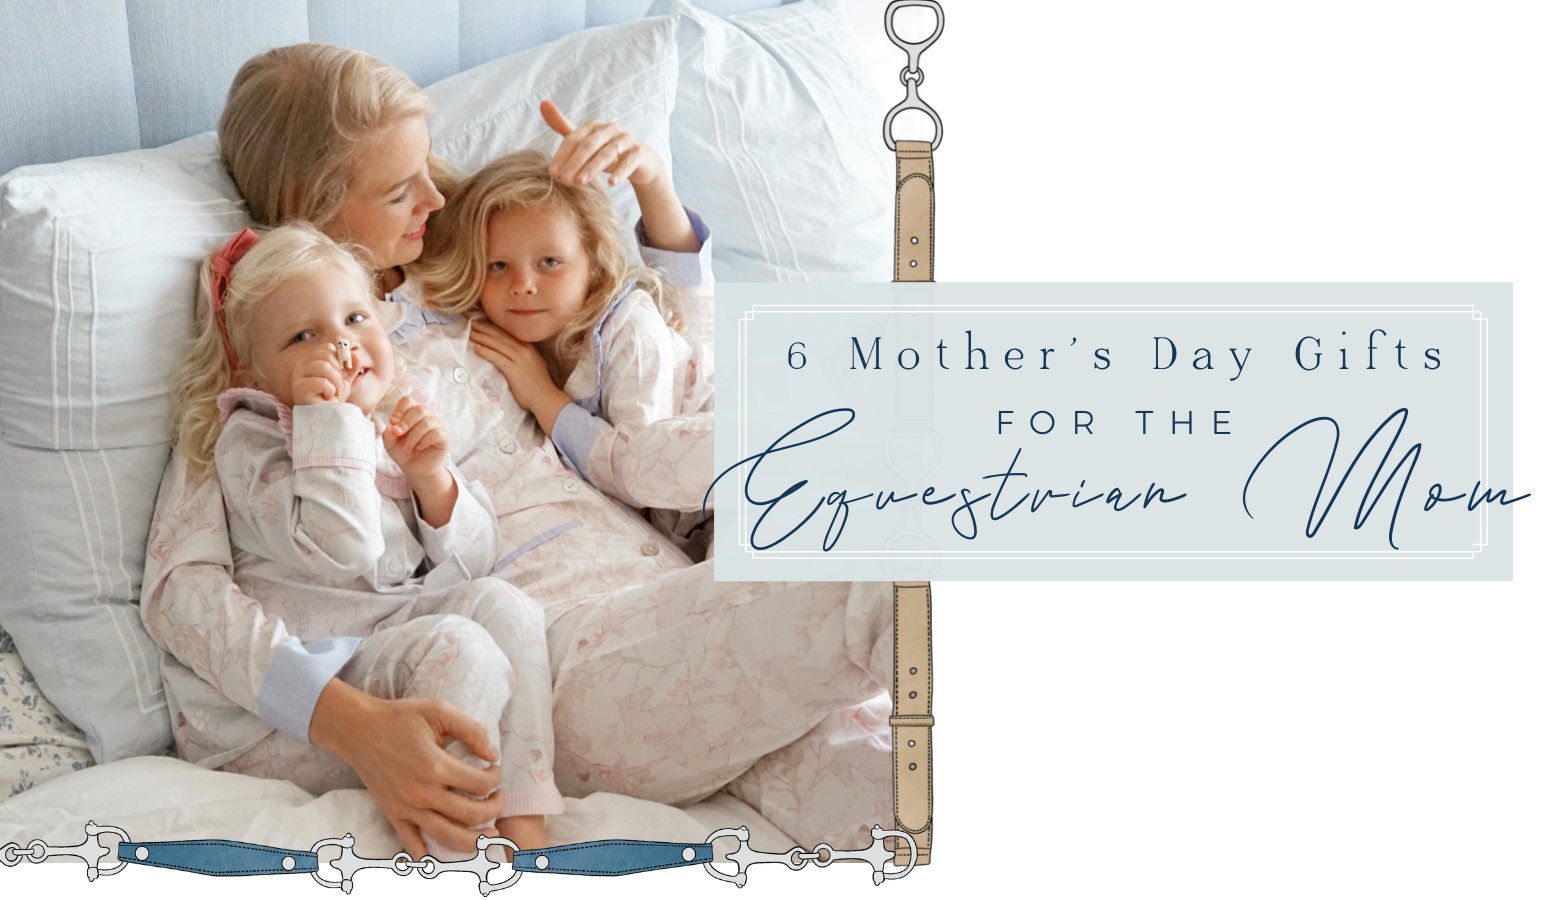 6 Mother’s Day Gifts For the Equestrian Mom